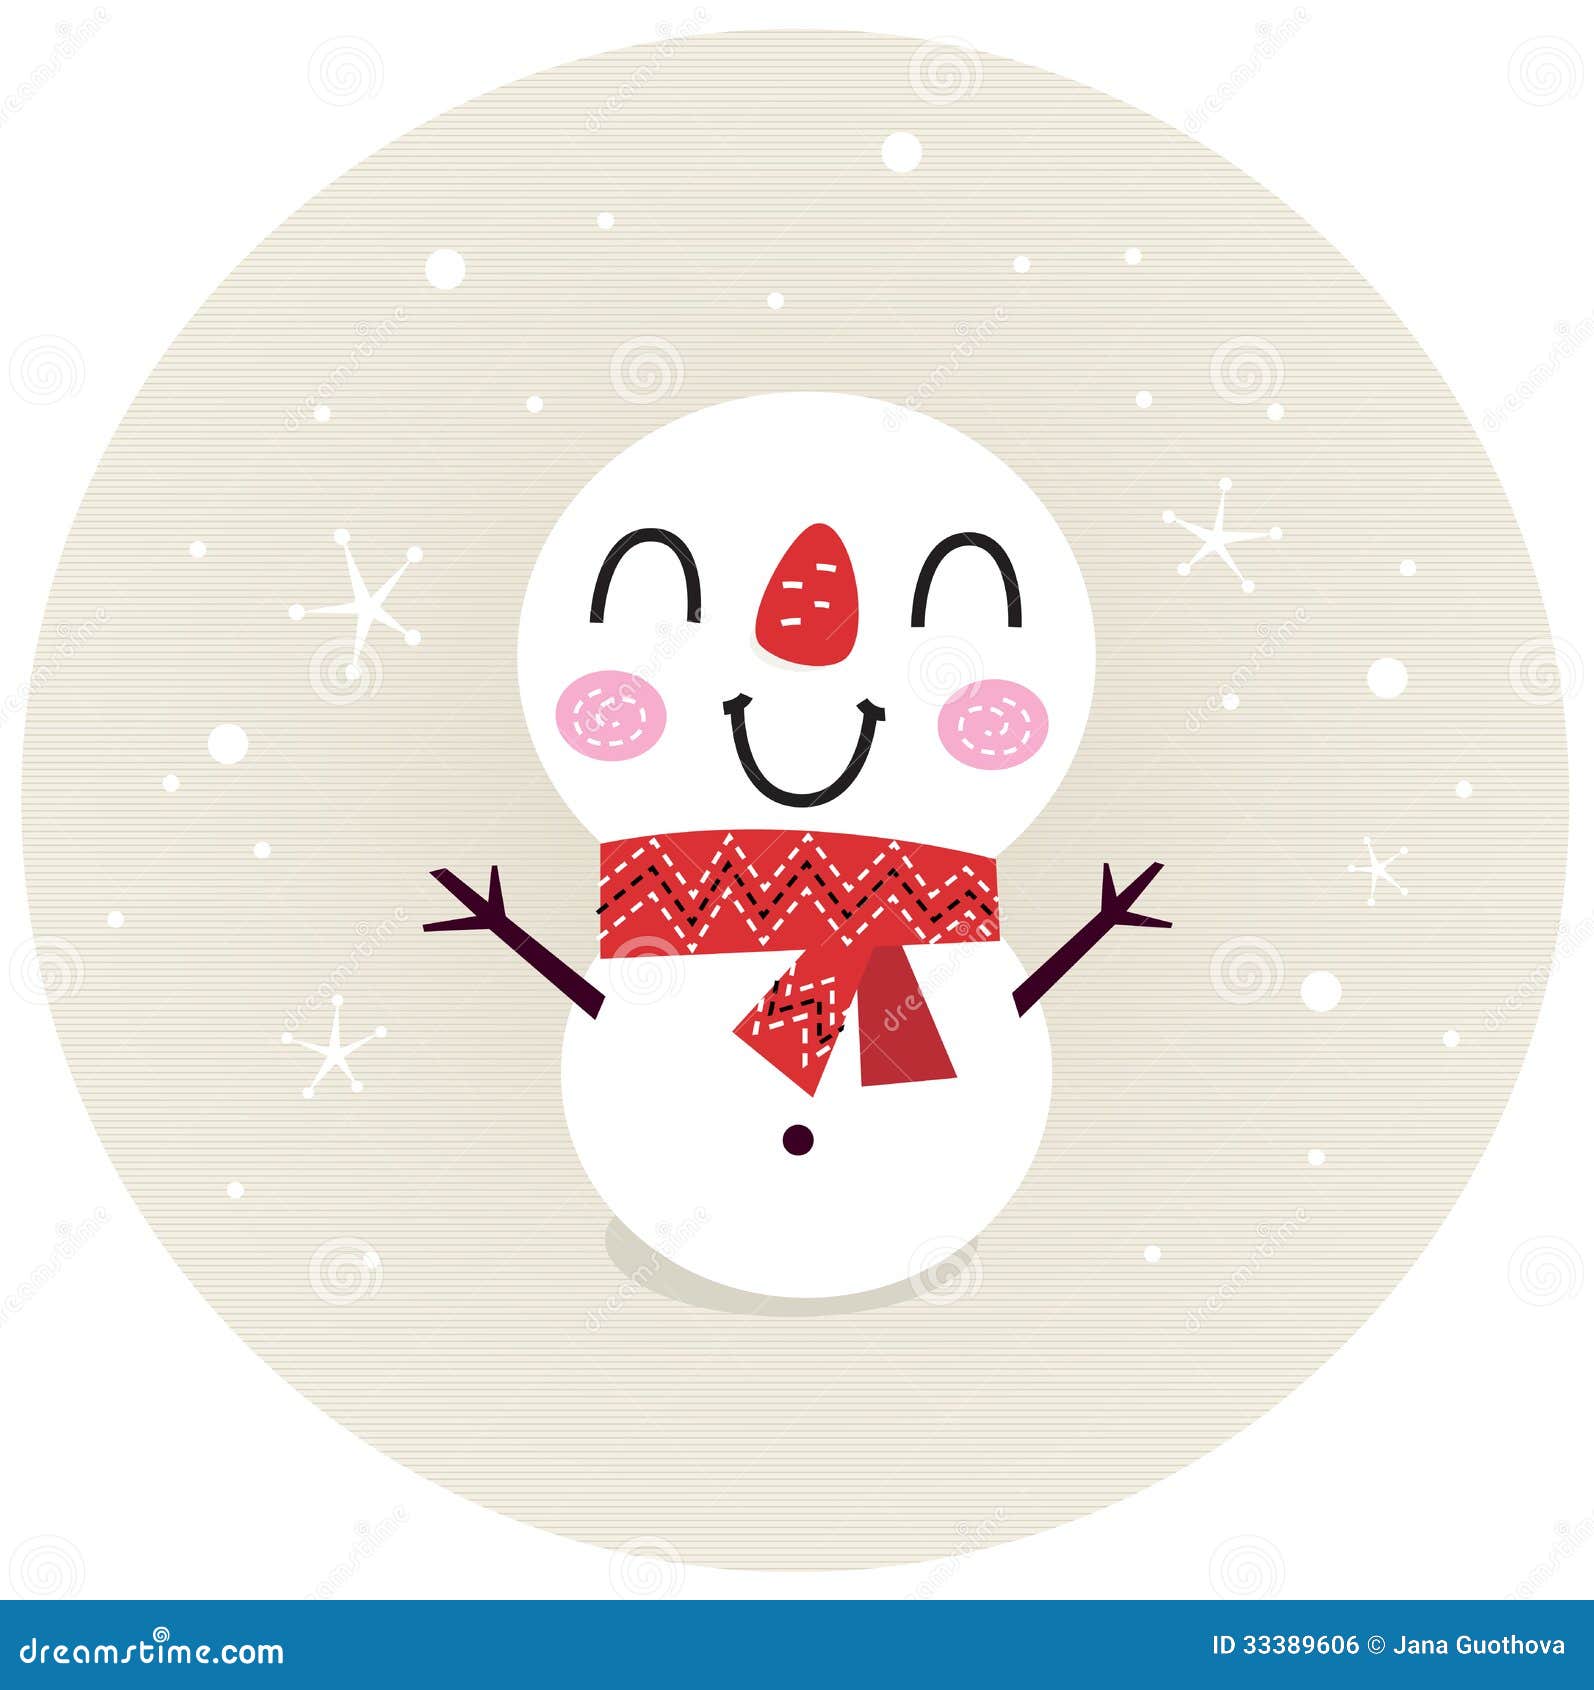 Cute Retro Snowman In Circle Royalty Free Stock Image 